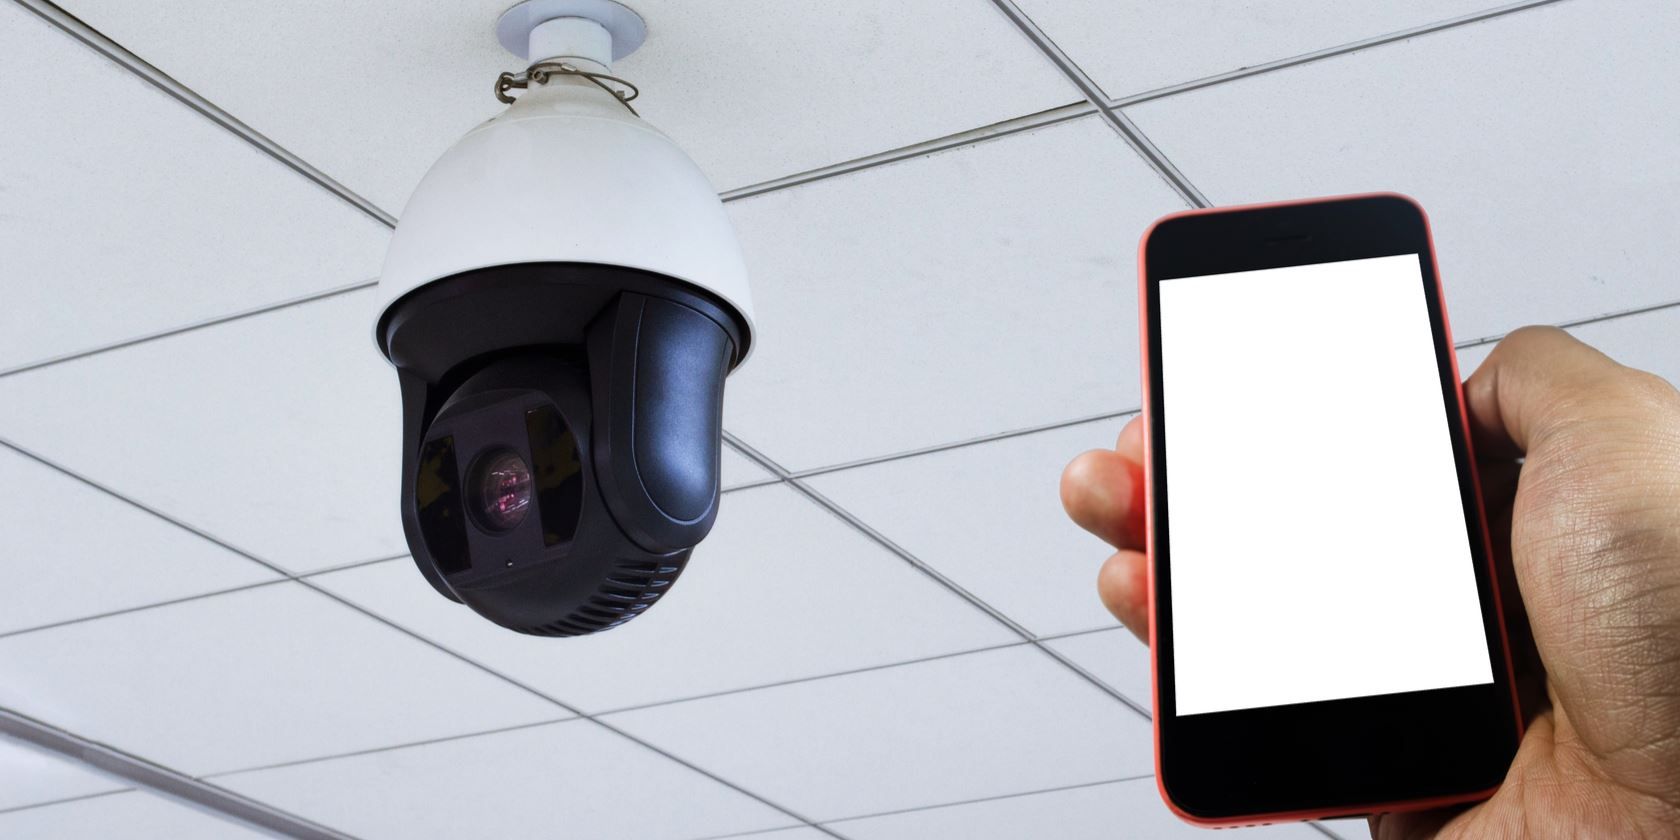 Negotiate Bare so How to Use Your Android Phone as an IP Webcam